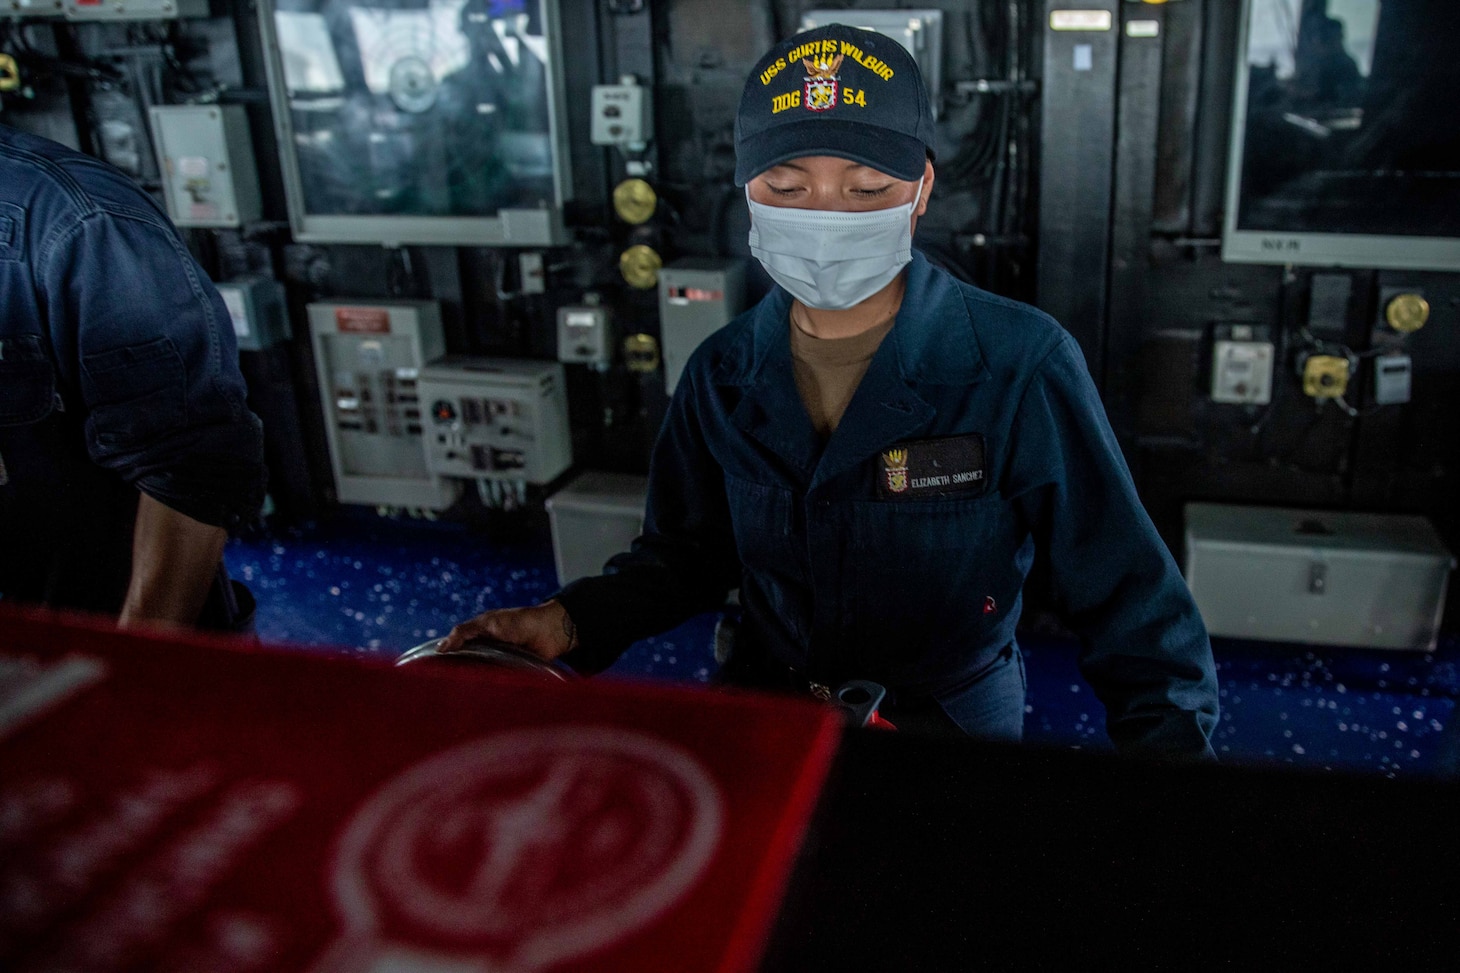 TAIWAN STRAIT (May 18, 2021) – Boatswain’s Mate Seaman Elizabeth Sanchez, from Houston, mans the helm on the bridge of the Arleigh Burke-class guided-missile destroyer USS Curtis Wilbur (DDG 54) as the ship conducts routine operations. Curtis Wilbur is assigned to Commander, Task Force 71/Destroyer Squadron (DESRON) 15, the Navy’s largest forward DESRON and the U.S. 7th Fleet’s principal surface force. (U.S. Navy photo by Mass Communication Specialist 3rd Class Zenaida Roth)